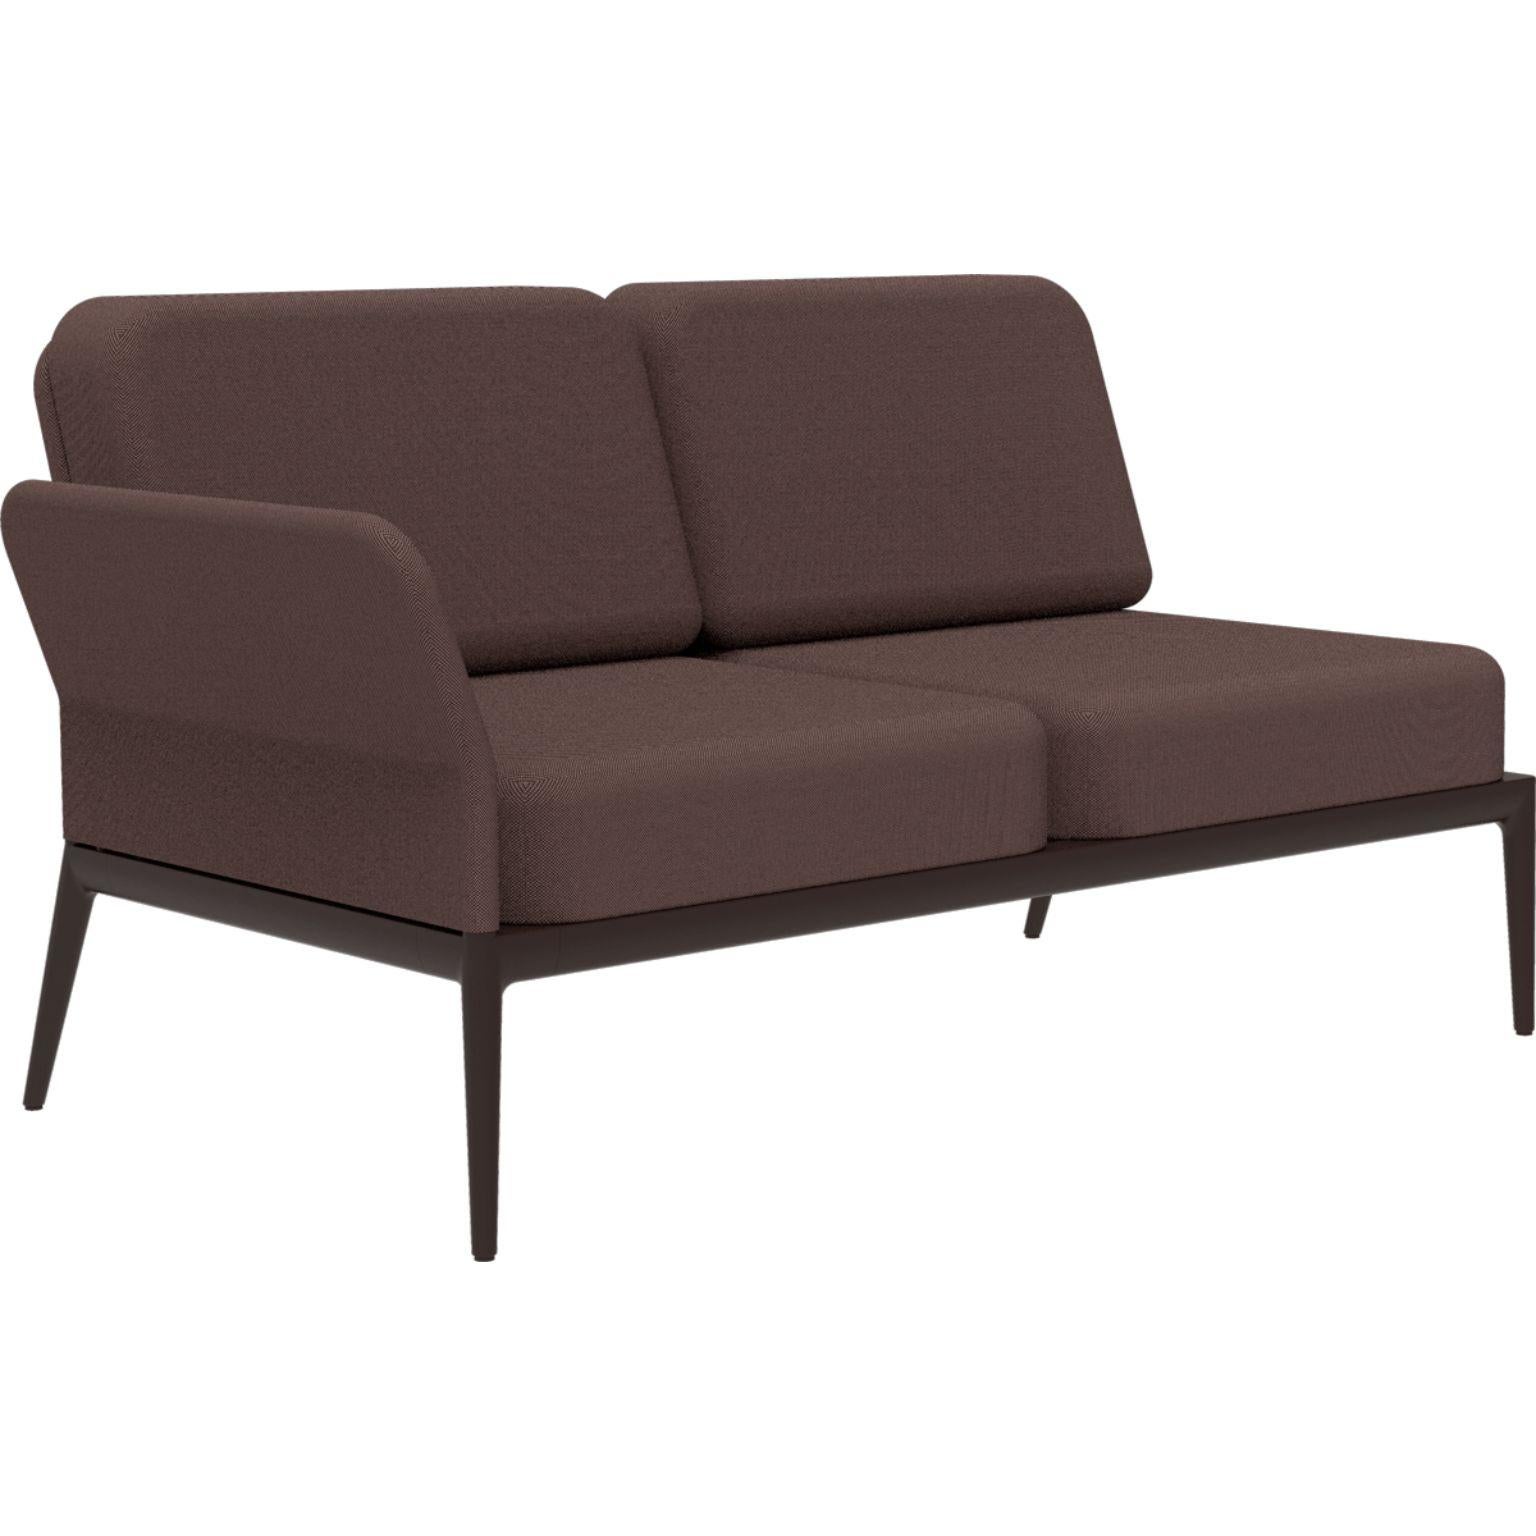 Cover chocolate double right modular sofa by MOWEE
Dimensions: D 83 x W 148 x H 81 cm (seat height 42 cm).
Material: Aluminum and upholstery.
Weight: 29 kg.
Also available in different colors and finishes. 

An unmistakable collection for its